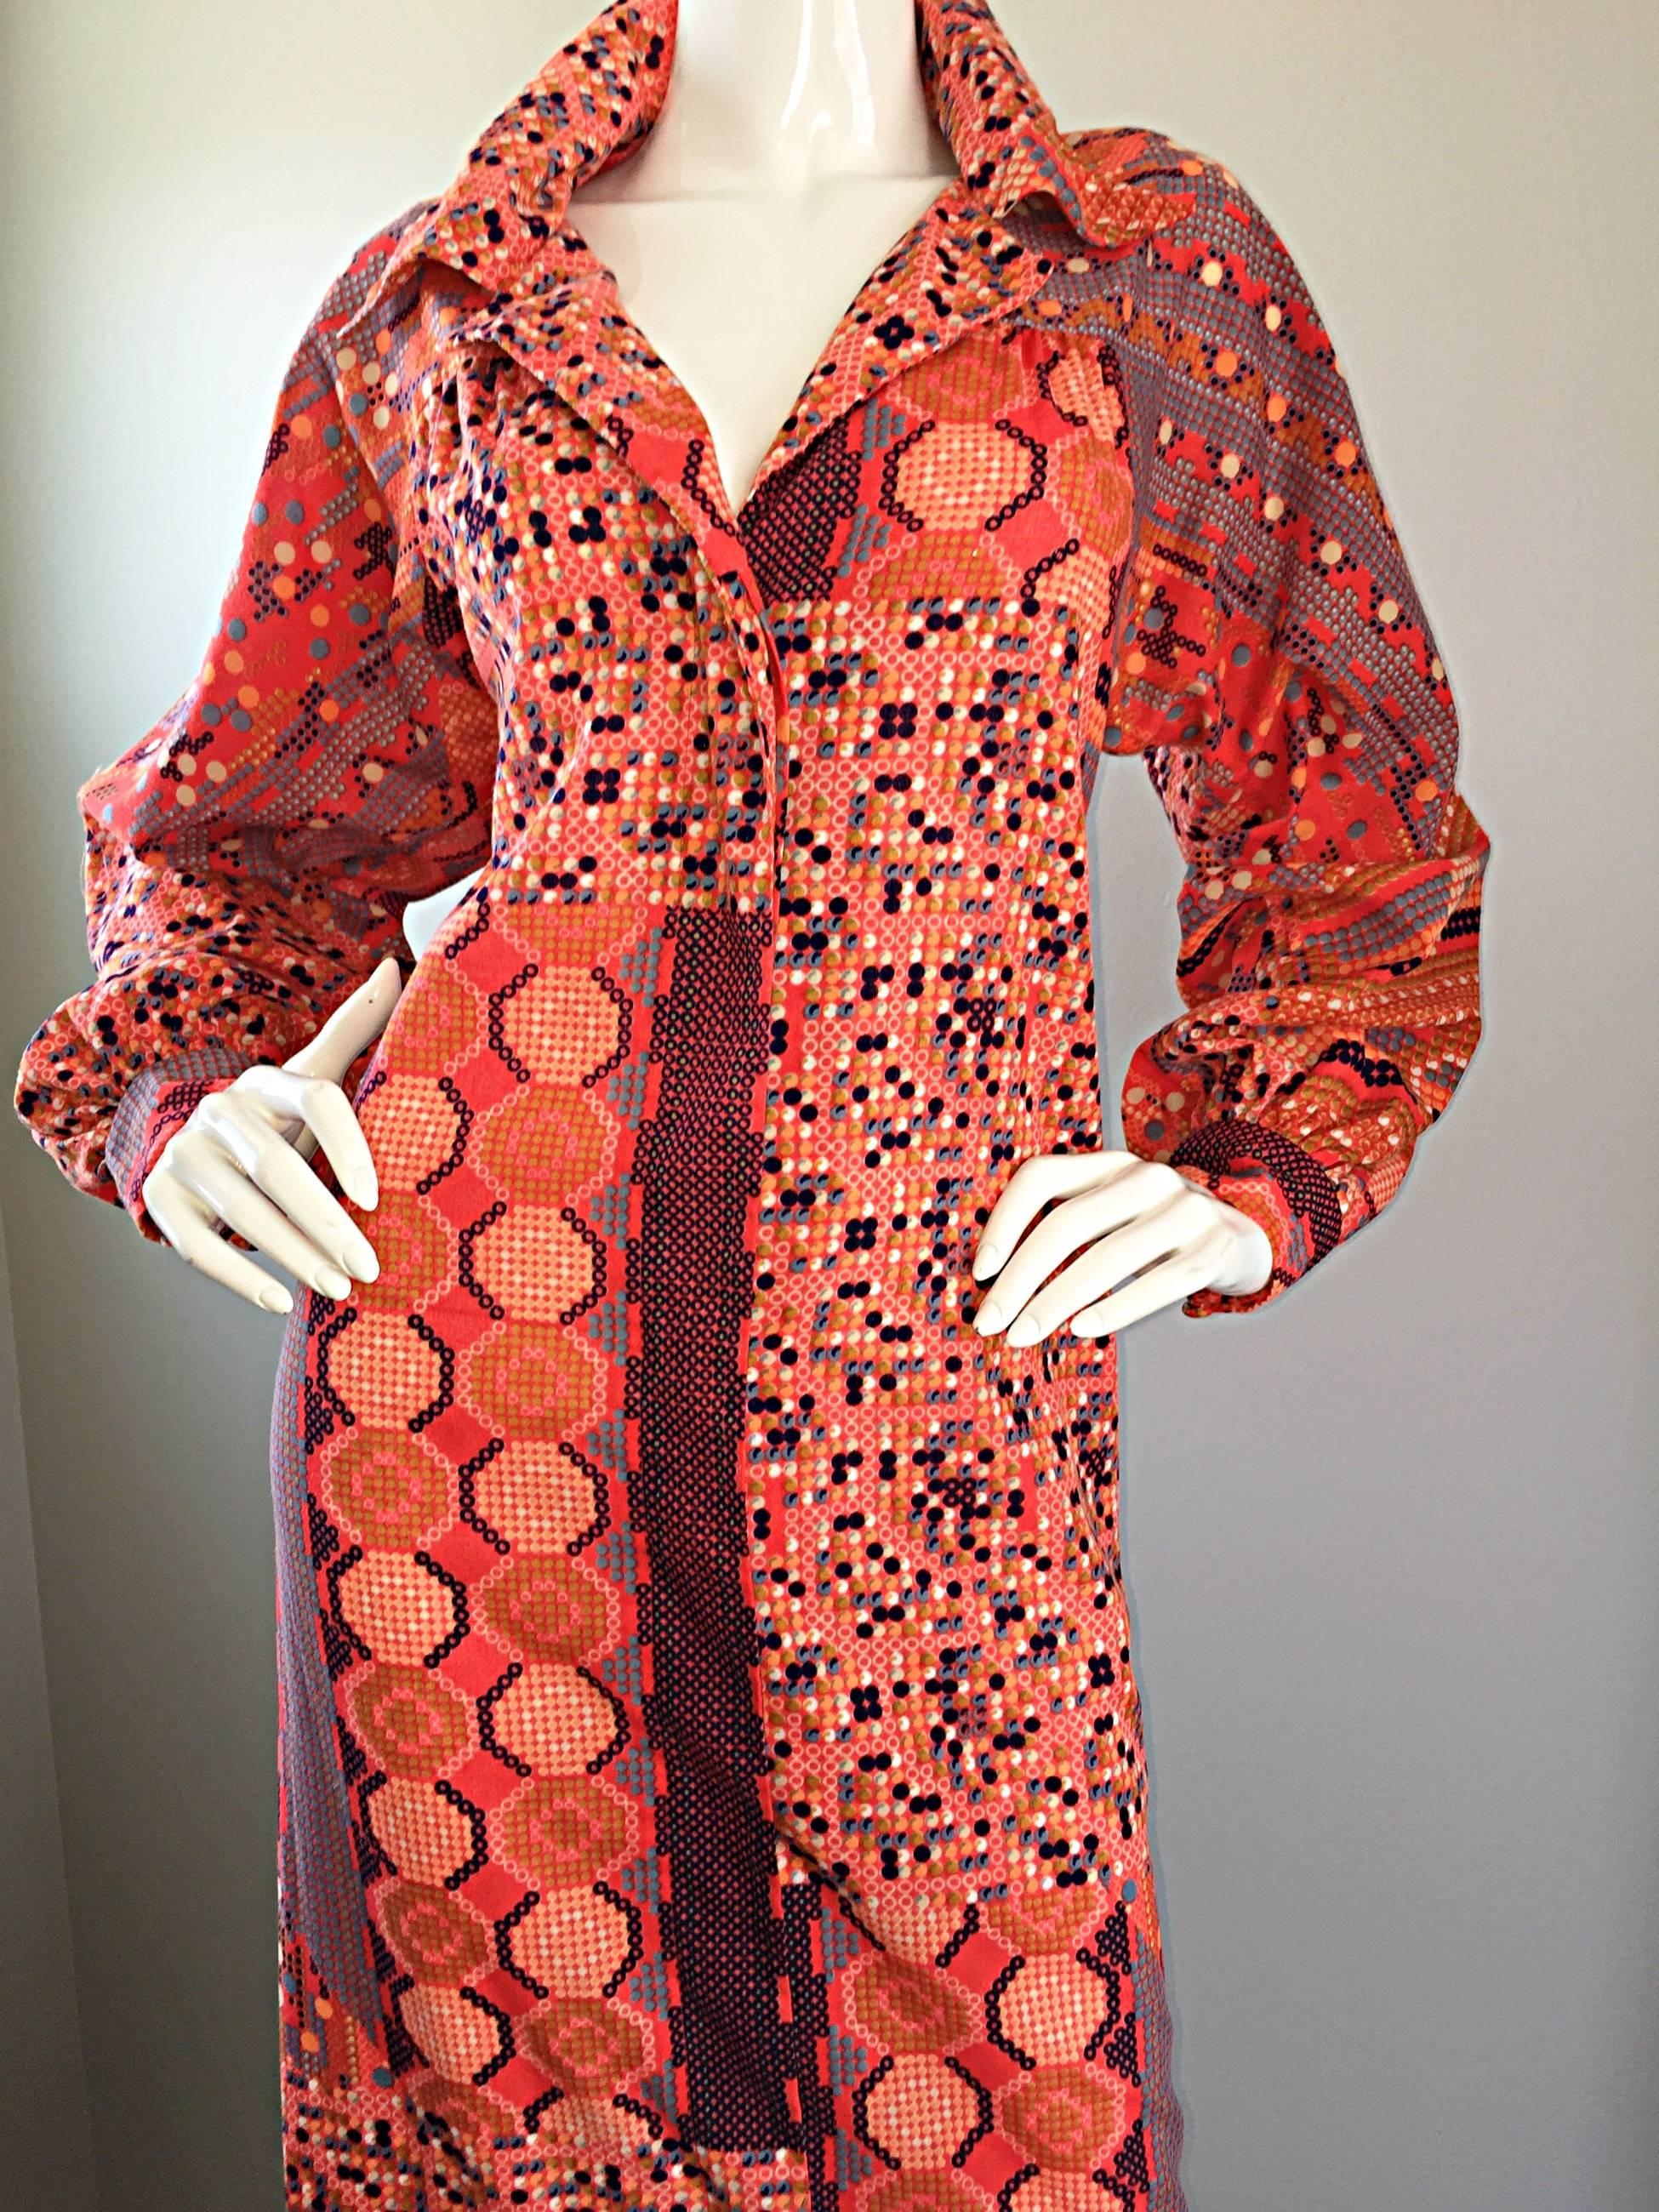 1970s Jay Morley For Fern Viollette ' Tetris ' Print 70s Vintage Shirt Dress In Excellent Condition For Sale In San Diego, CA